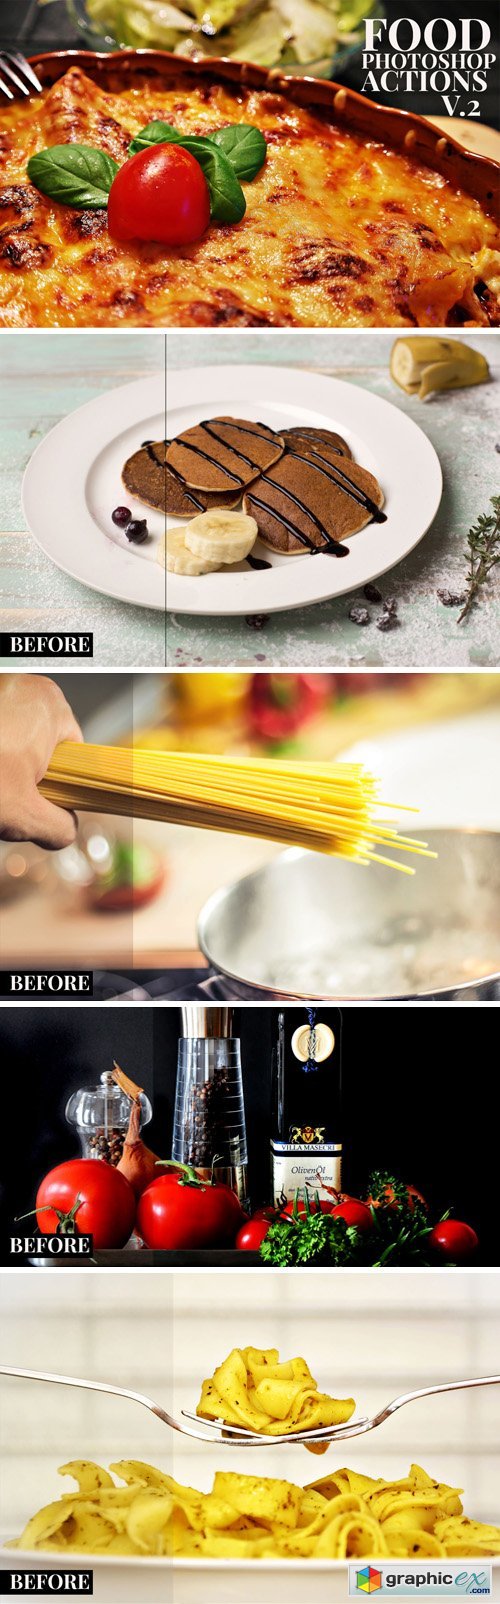 Photoshop Actions for Food Photography Vol.2